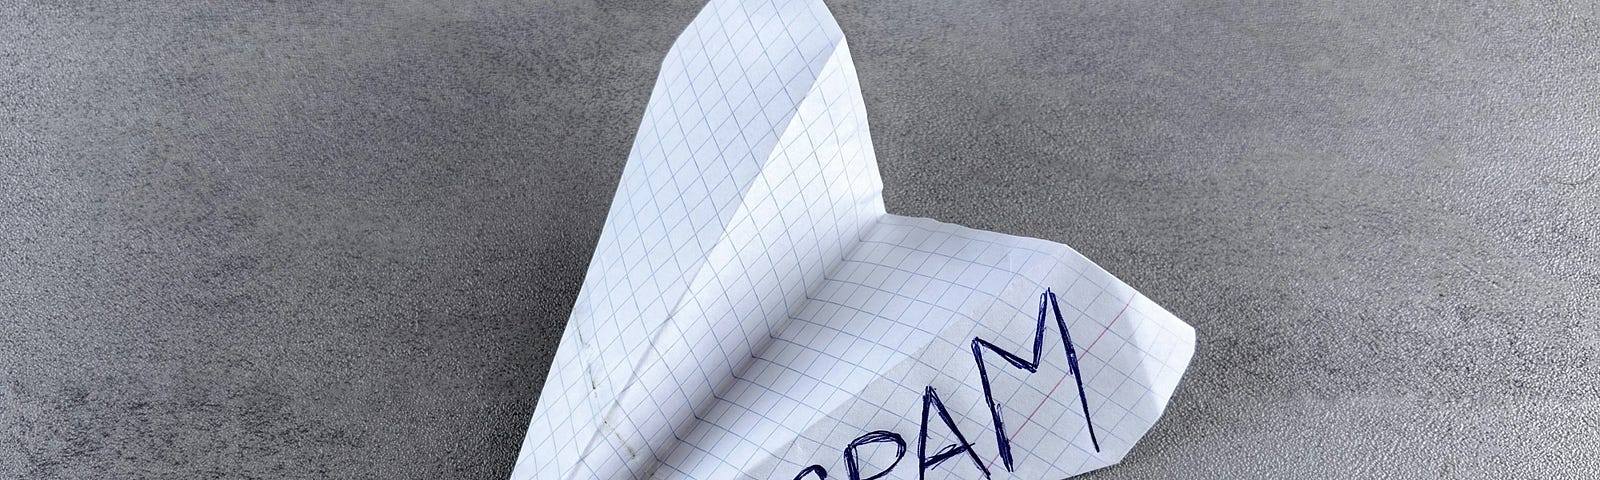 A folded paper airplane with the word spam on it.